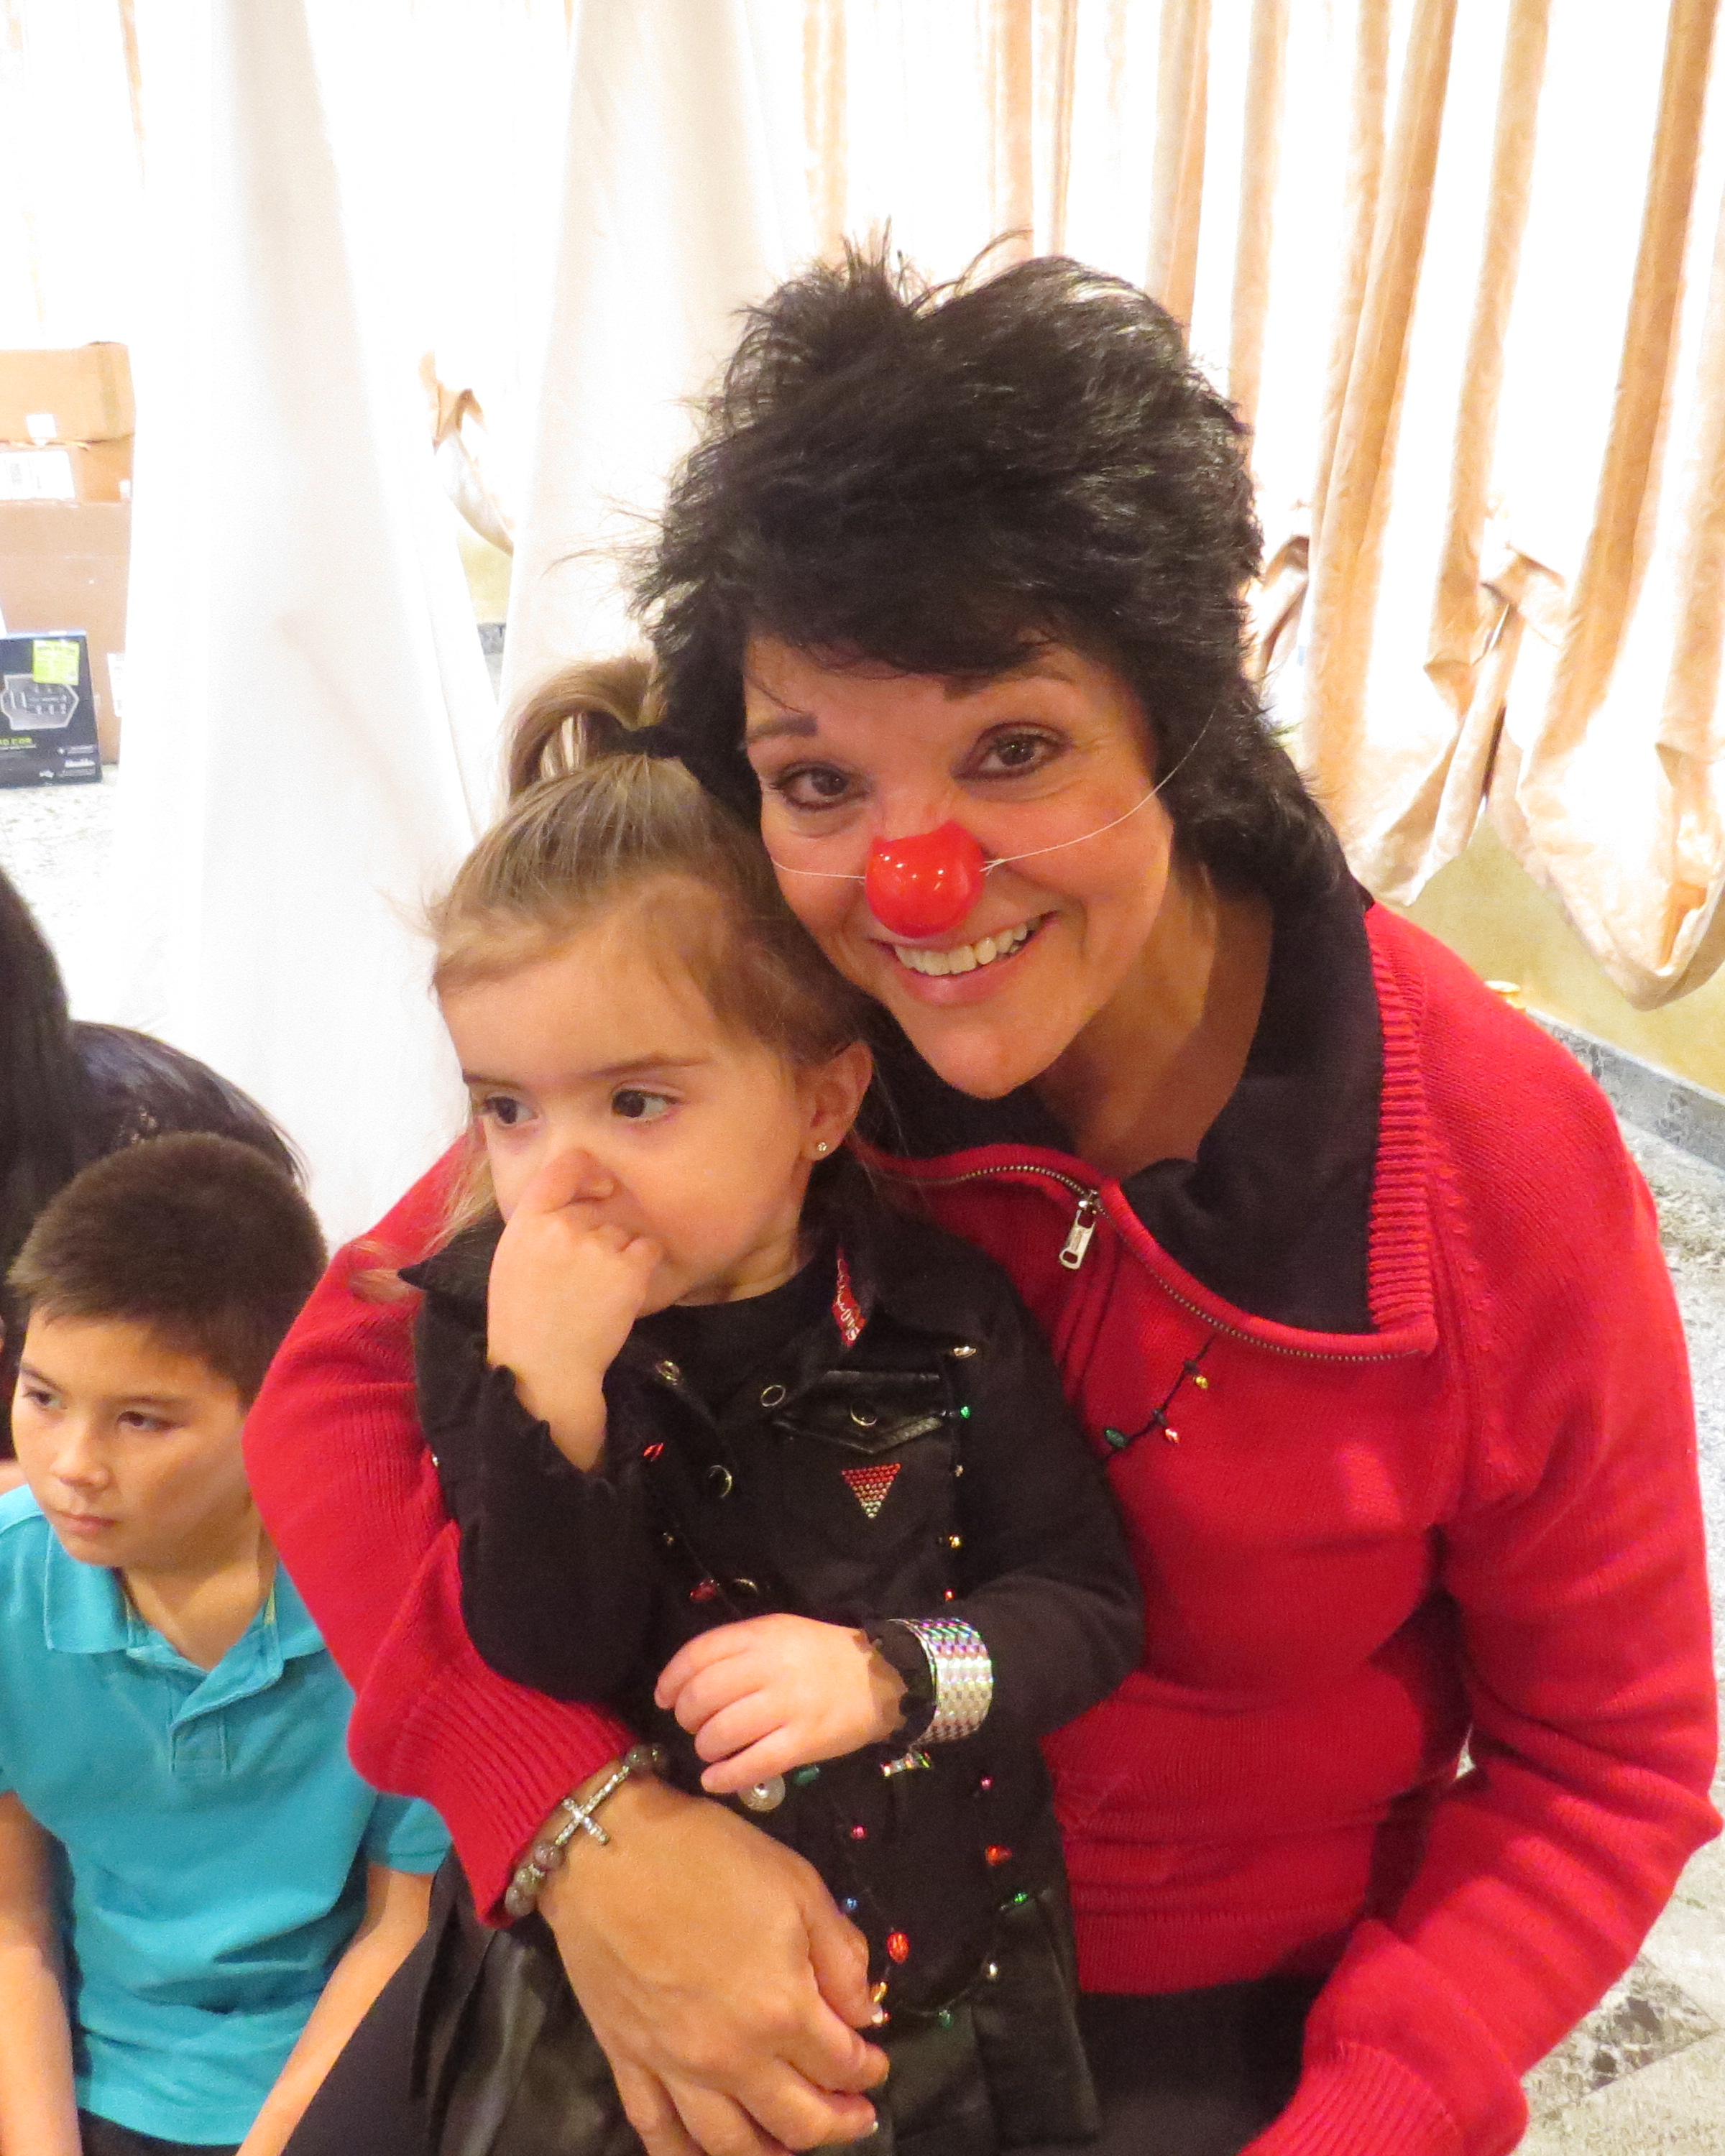 Although Gianna came with Grandma Teresa, it looks like she’s going home with Rudolph.